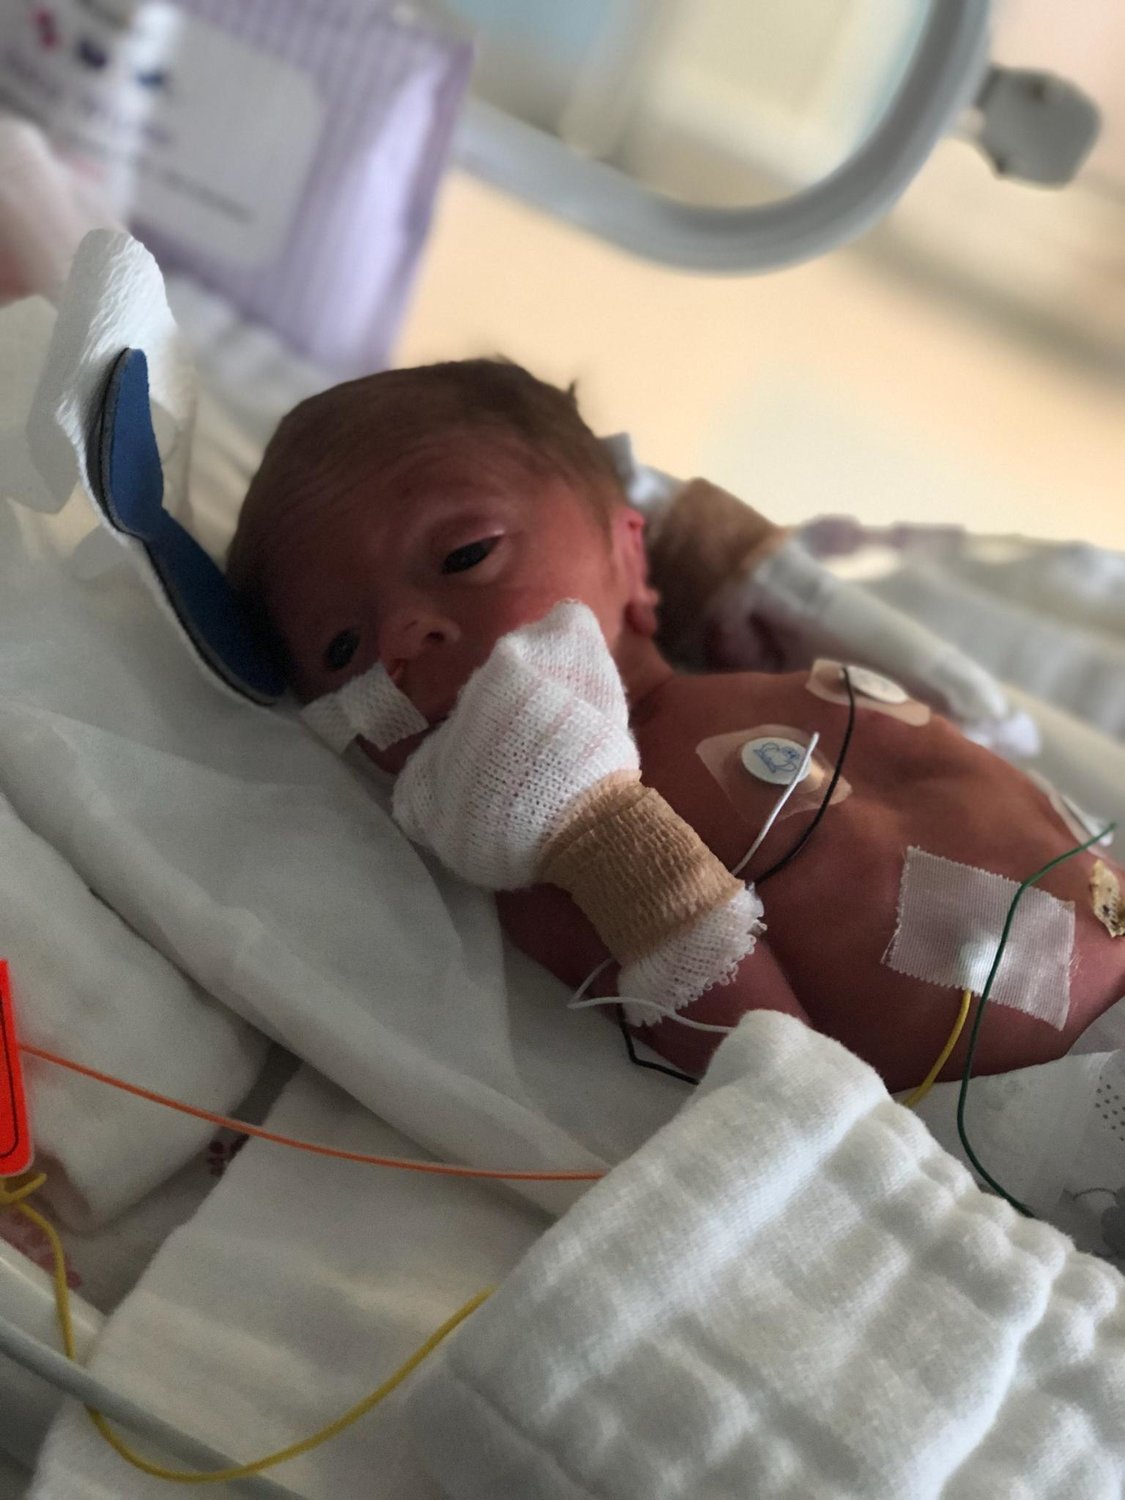 GETTING TREATMENT — Sloane Rose Hurlbut rests in the hospital following her premature birth in early 2019. She is now a healthy, happy toddler.